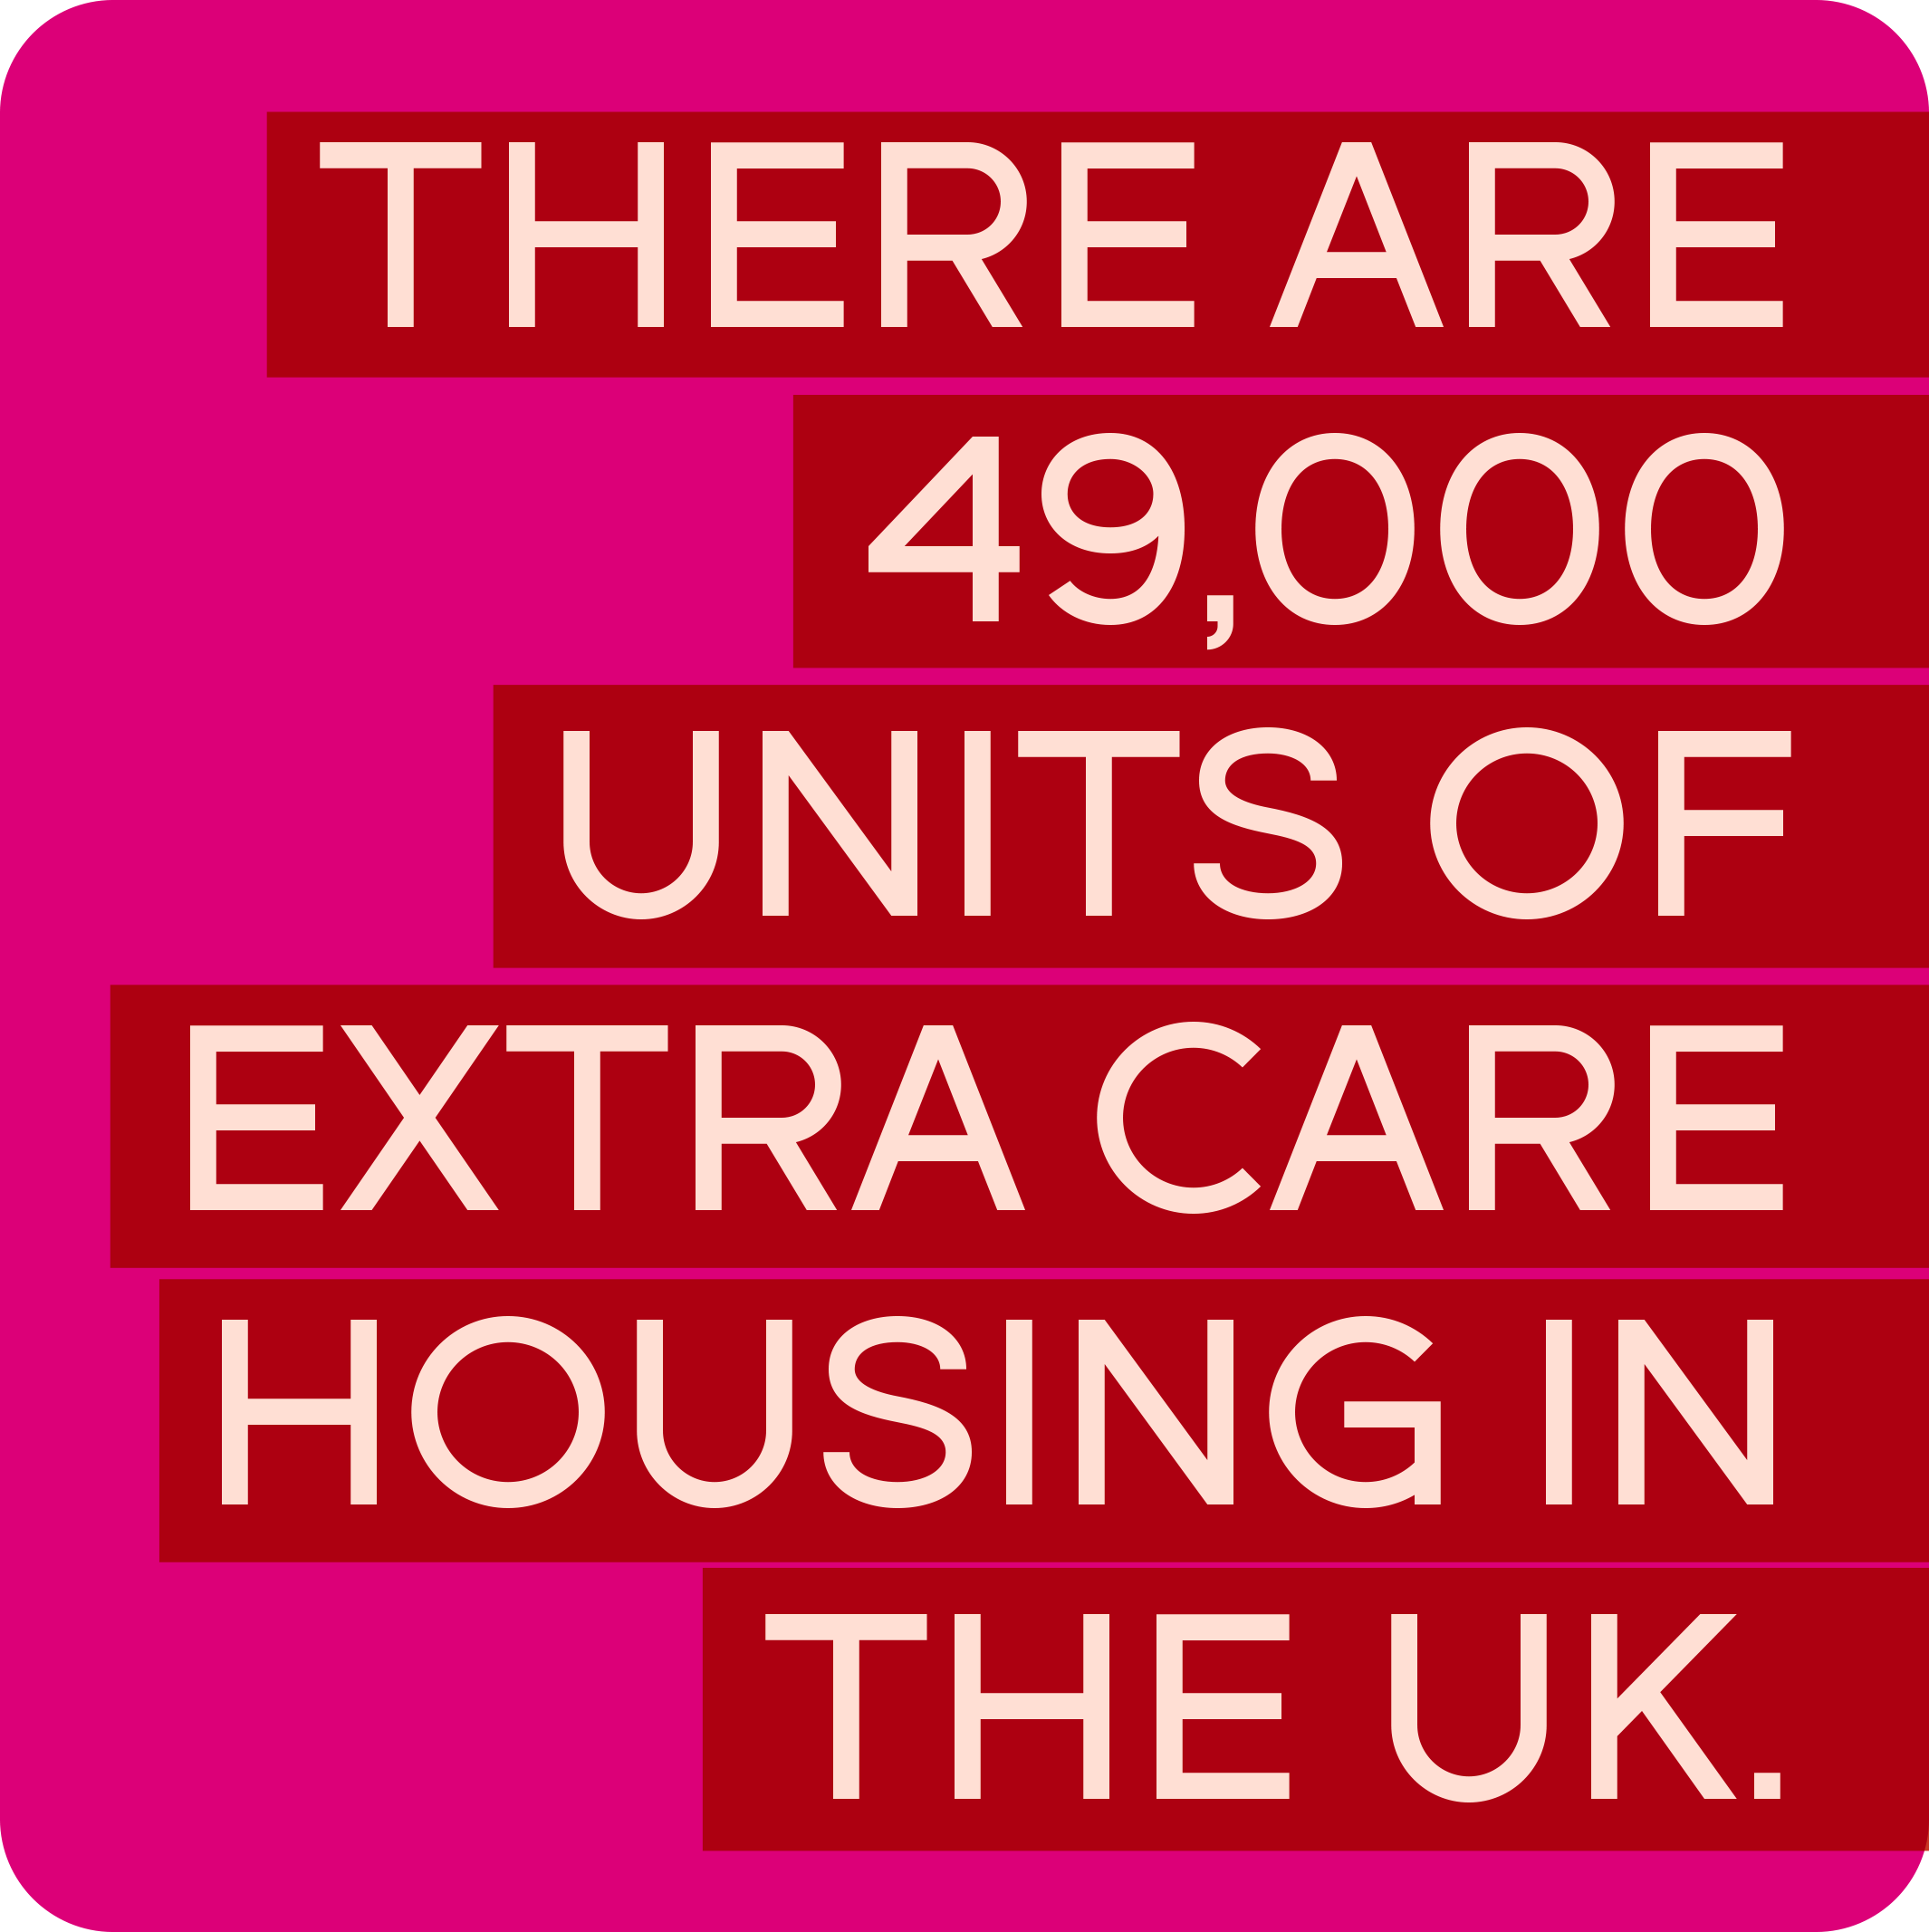 There are 49,000 units of extra care housing in the UK